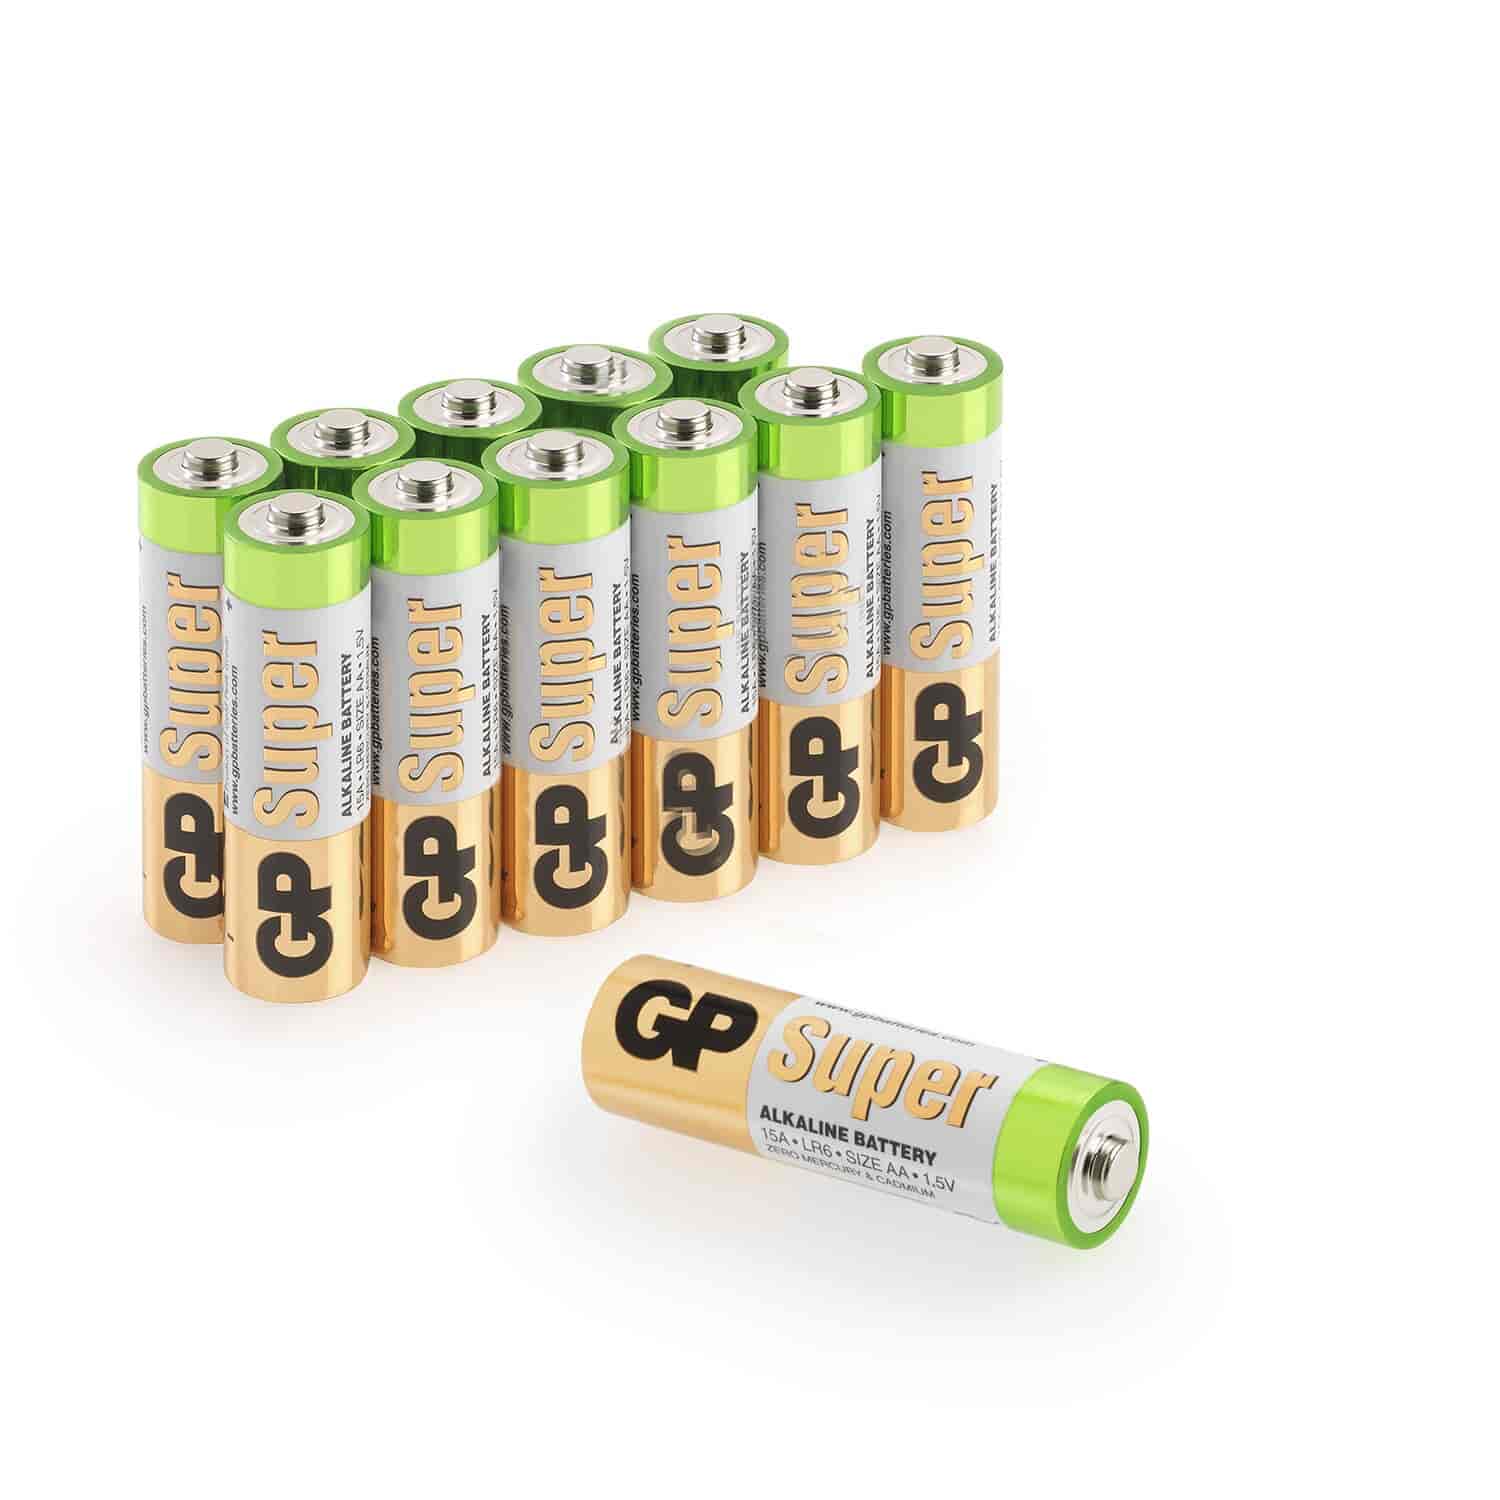 AA Batteri 1.5 Volt - GP Super alkaline batteri AA 12 PackAA Battery 1.5 Volt - GP Super alkaline battery AA. Longlife alkaline battery with a good balance between lifetime and price. Can be used for most tasks. AA batteries are also called LR6, E91 or Mignon. Diameter 14.5 mm. length 50.5 mm. - 12 PackGP